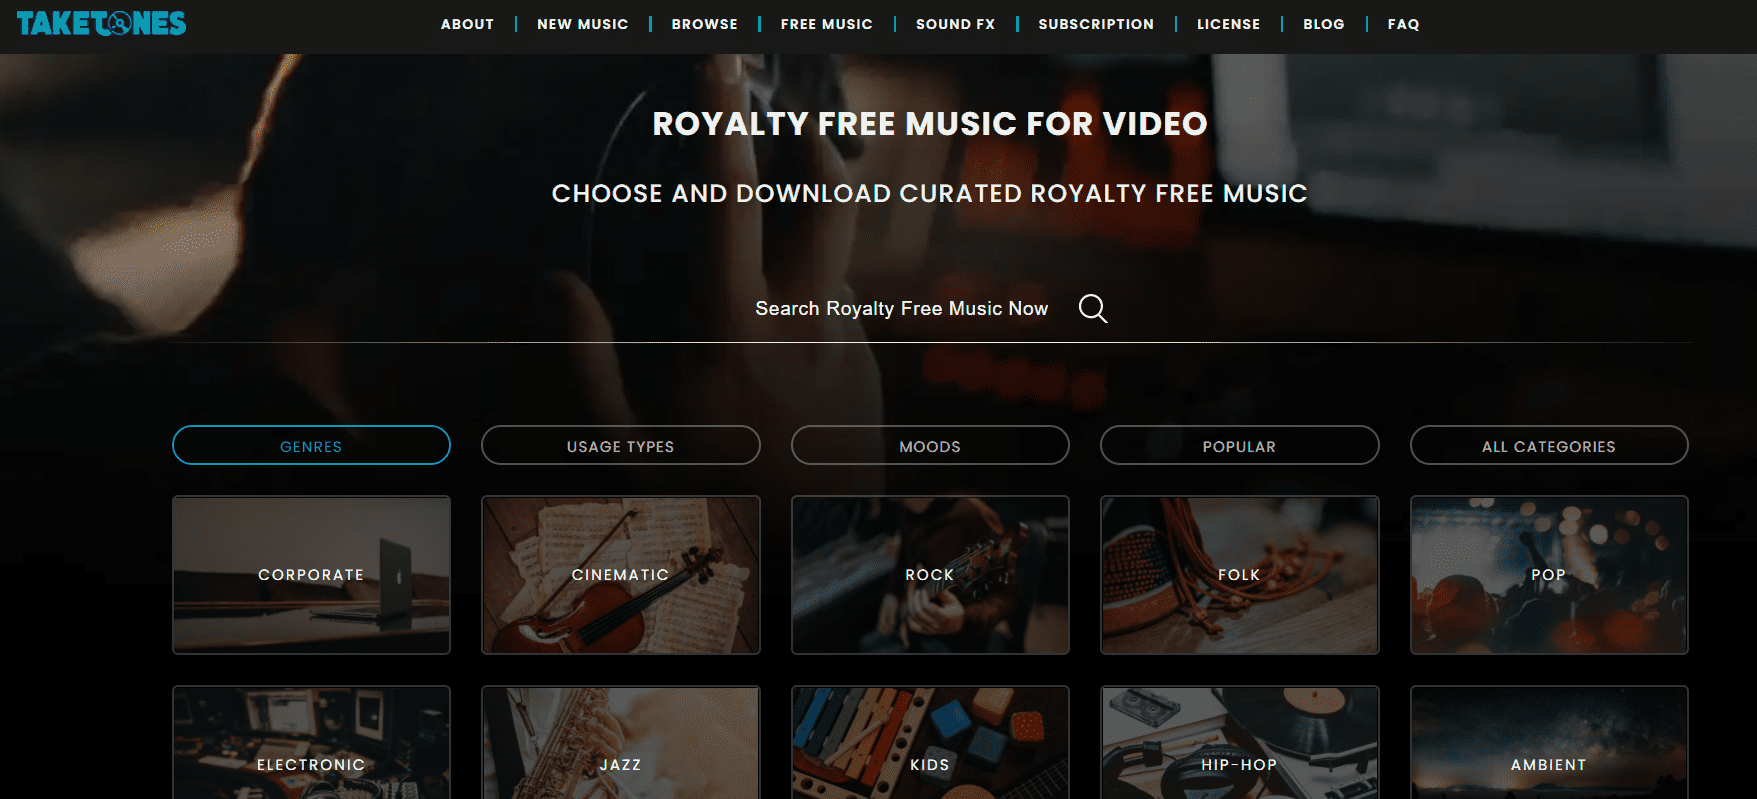 Take Tones Royalty Free Music for Videos